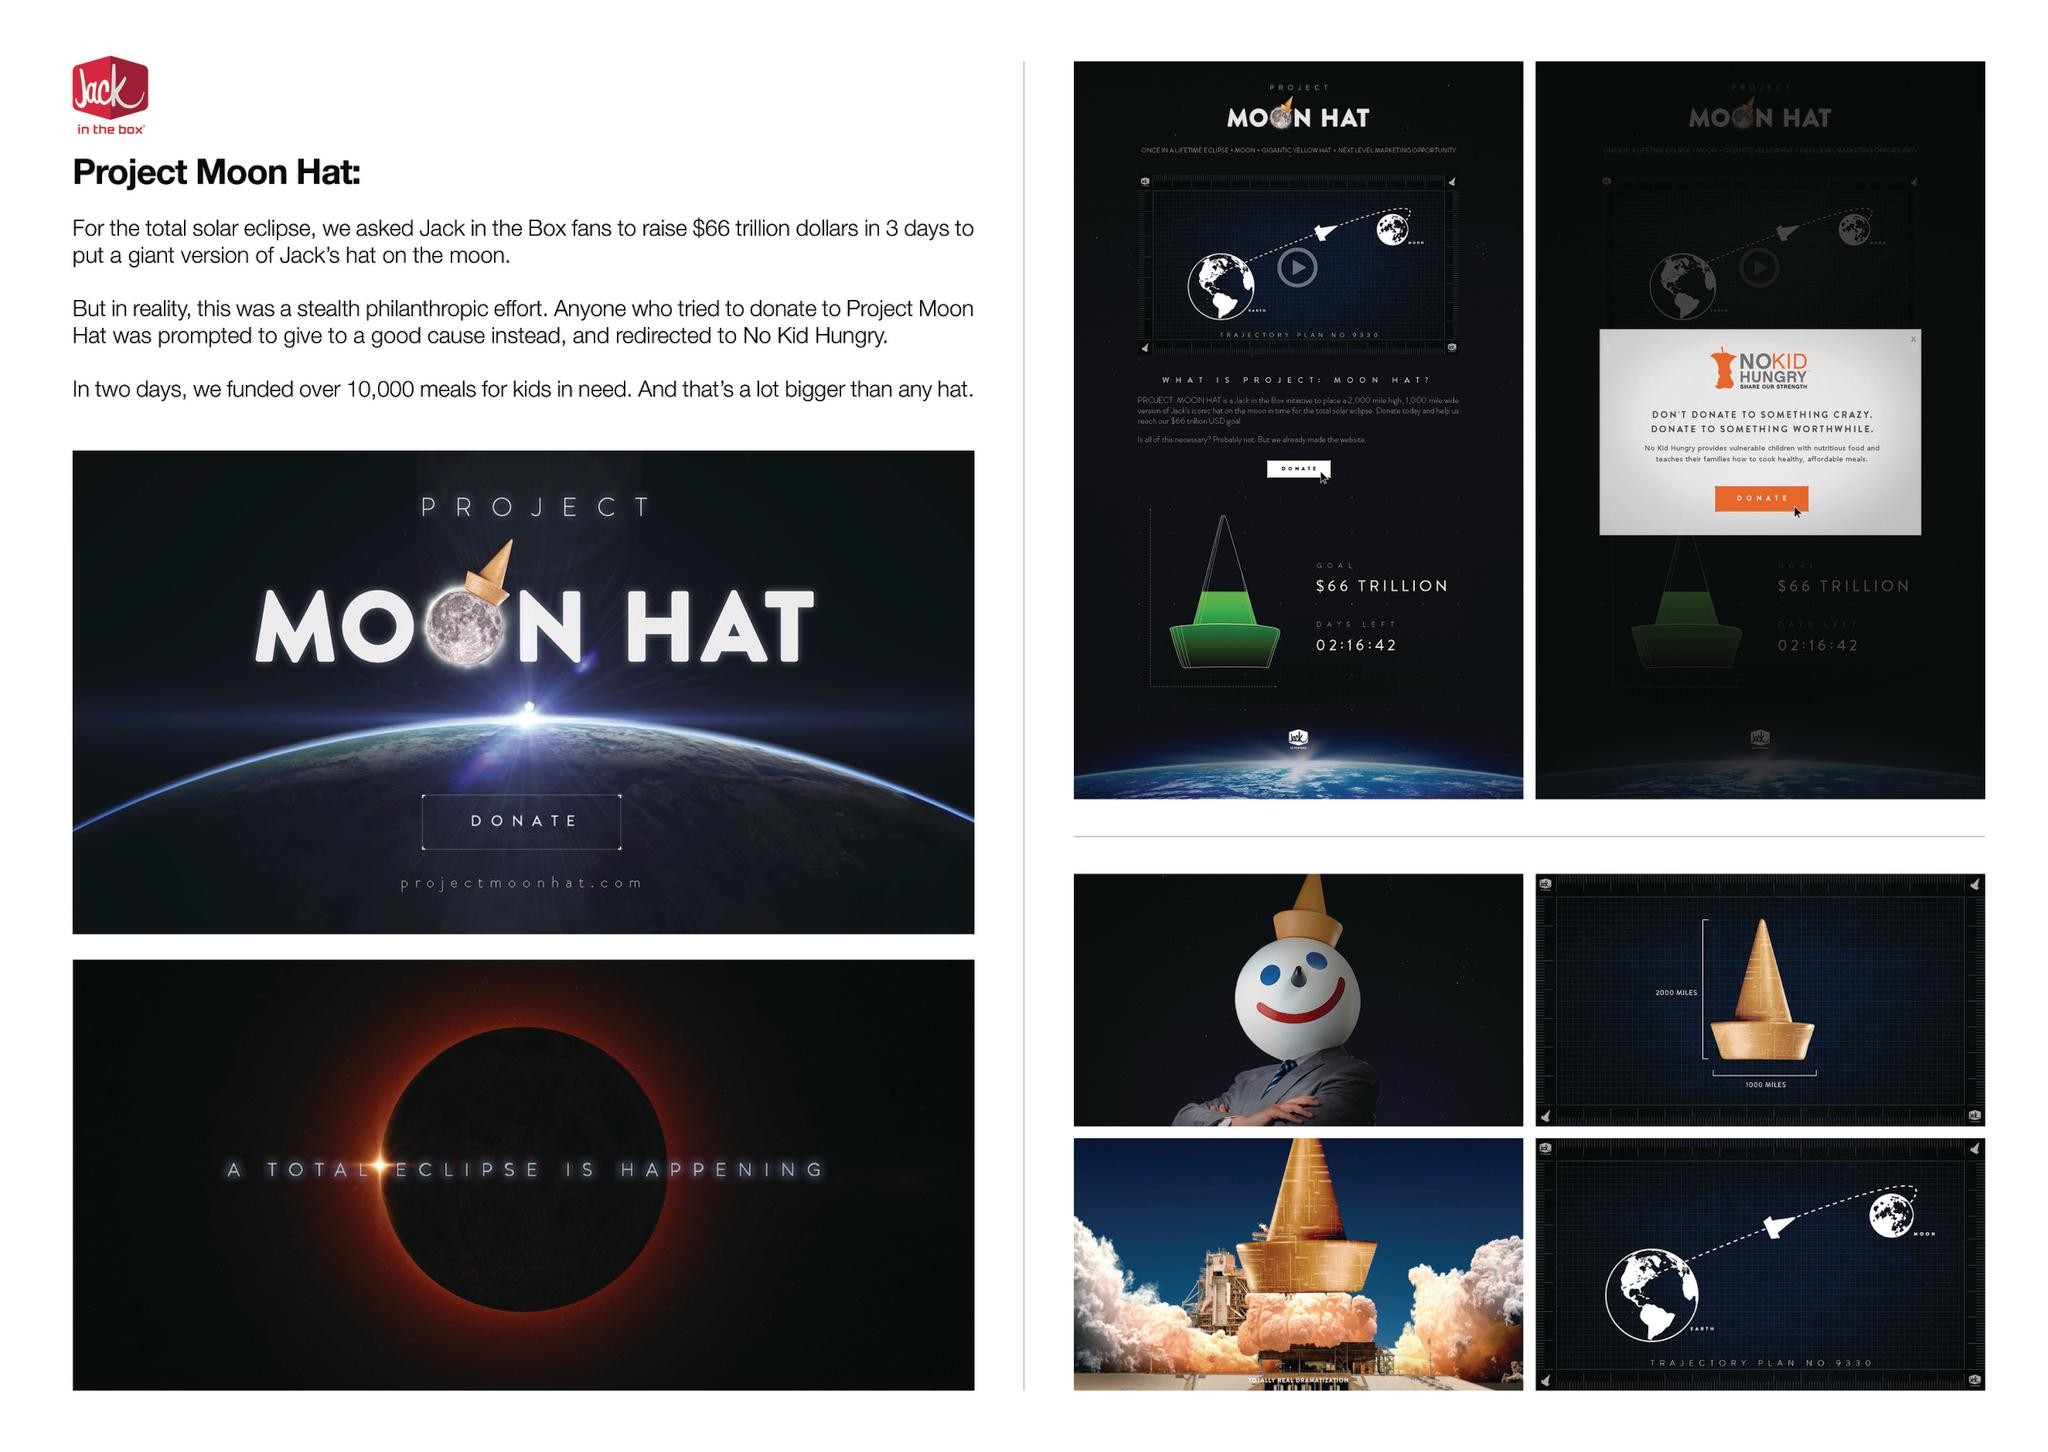 Project Moonhat